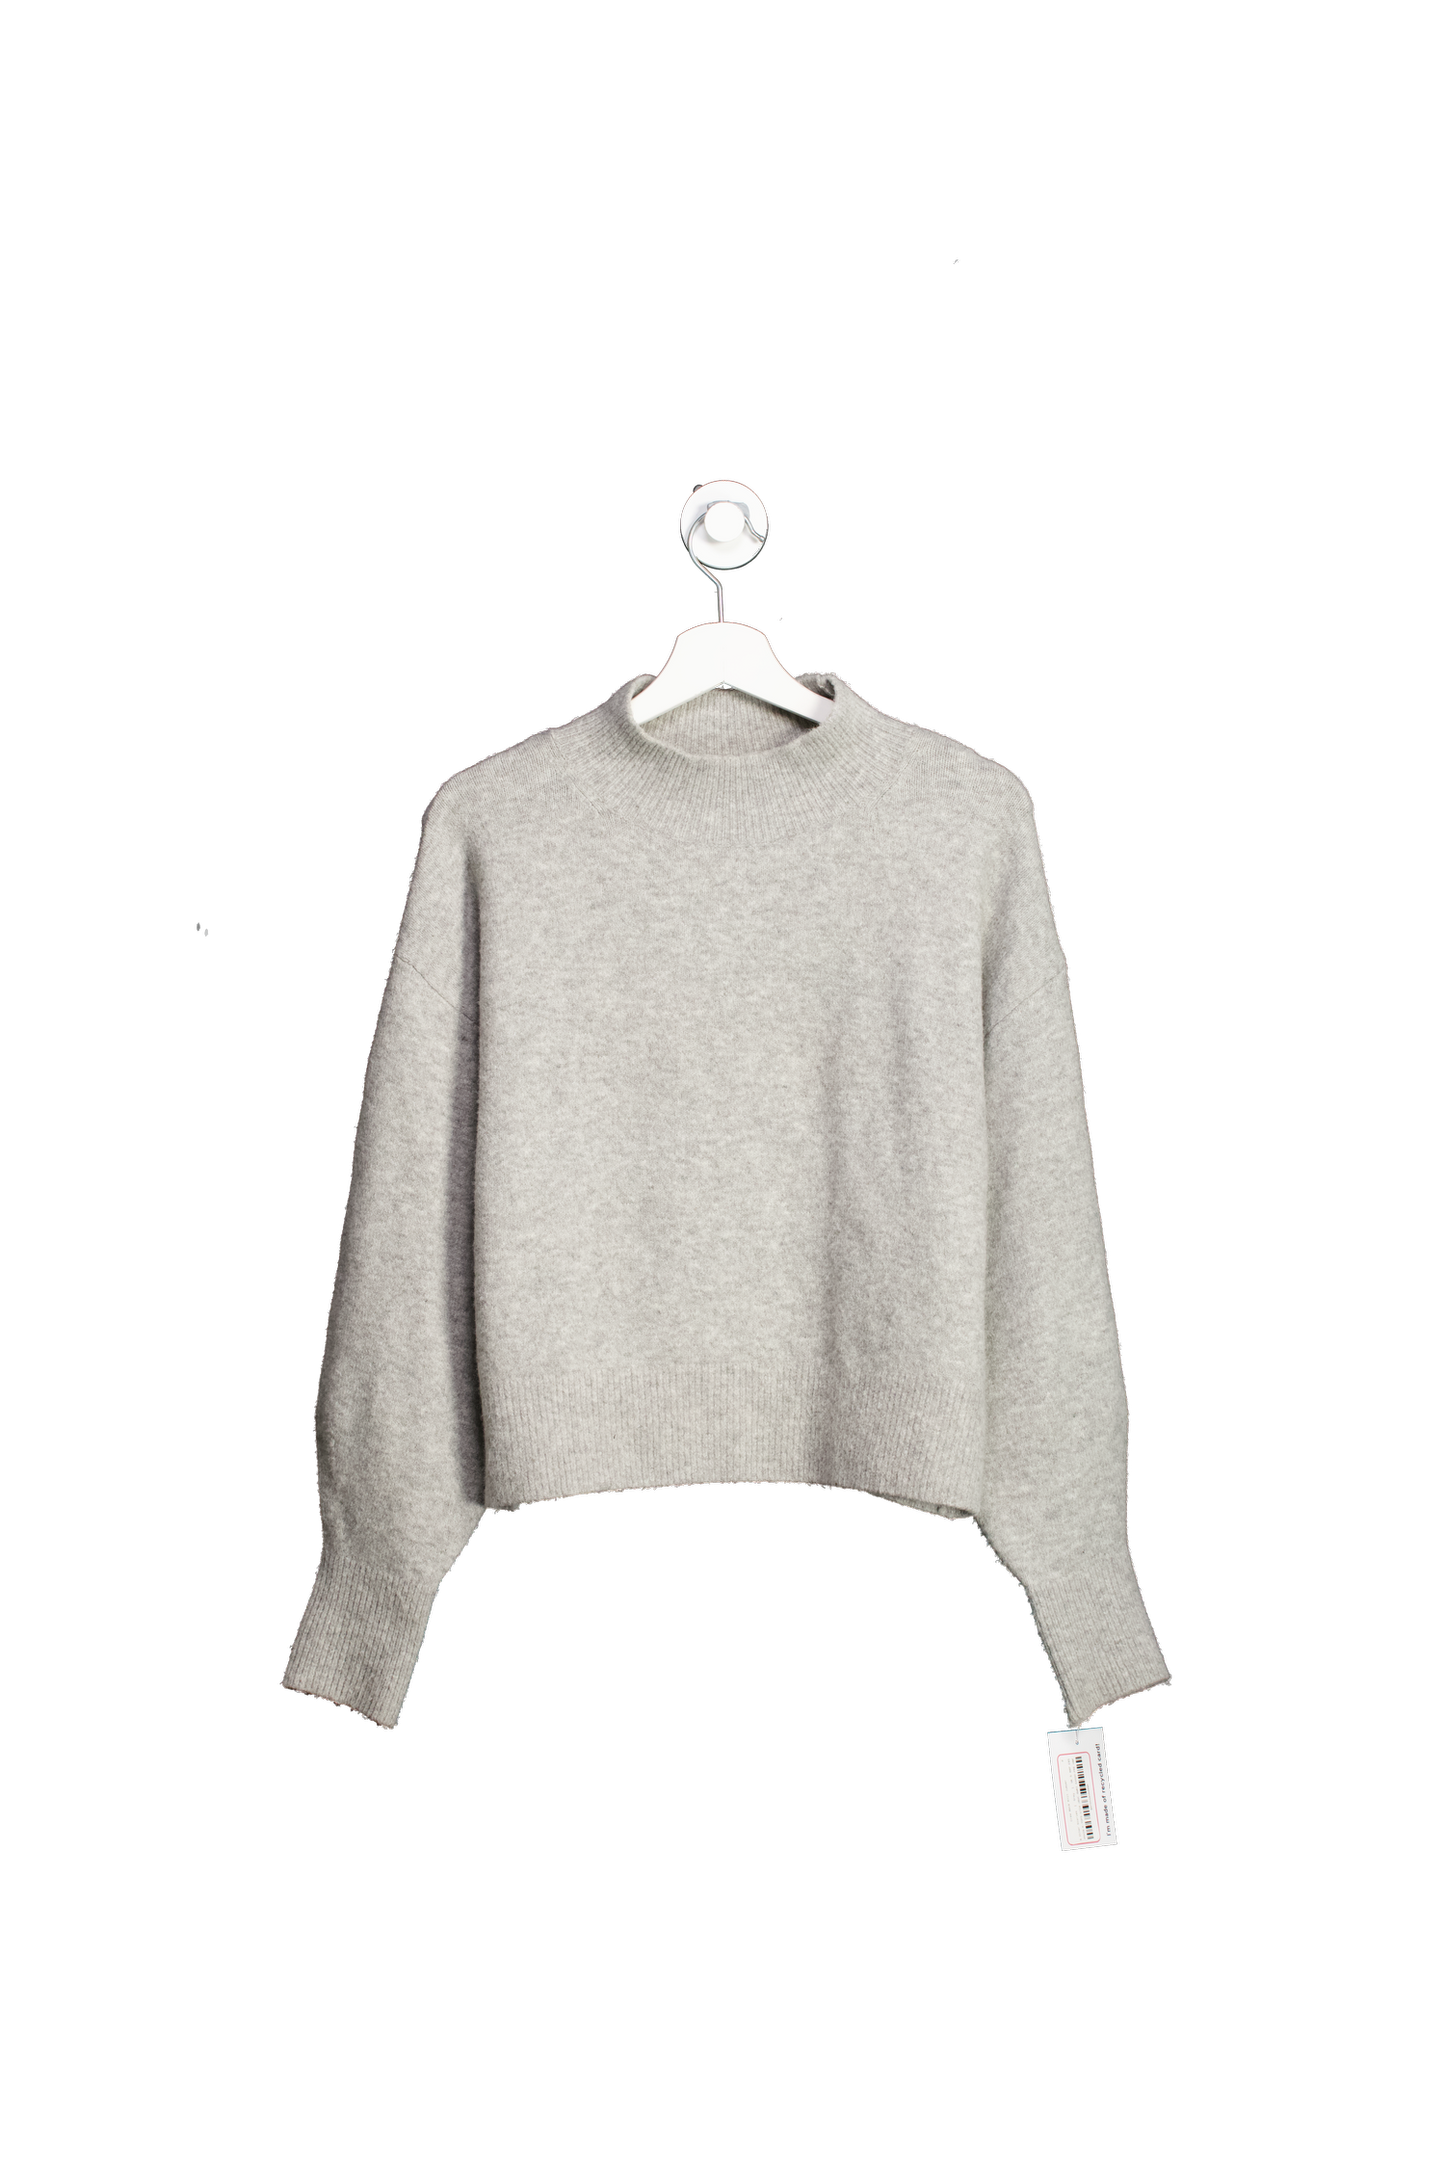 & Other Stories Grey Crew Neck Knit Jumper UK S